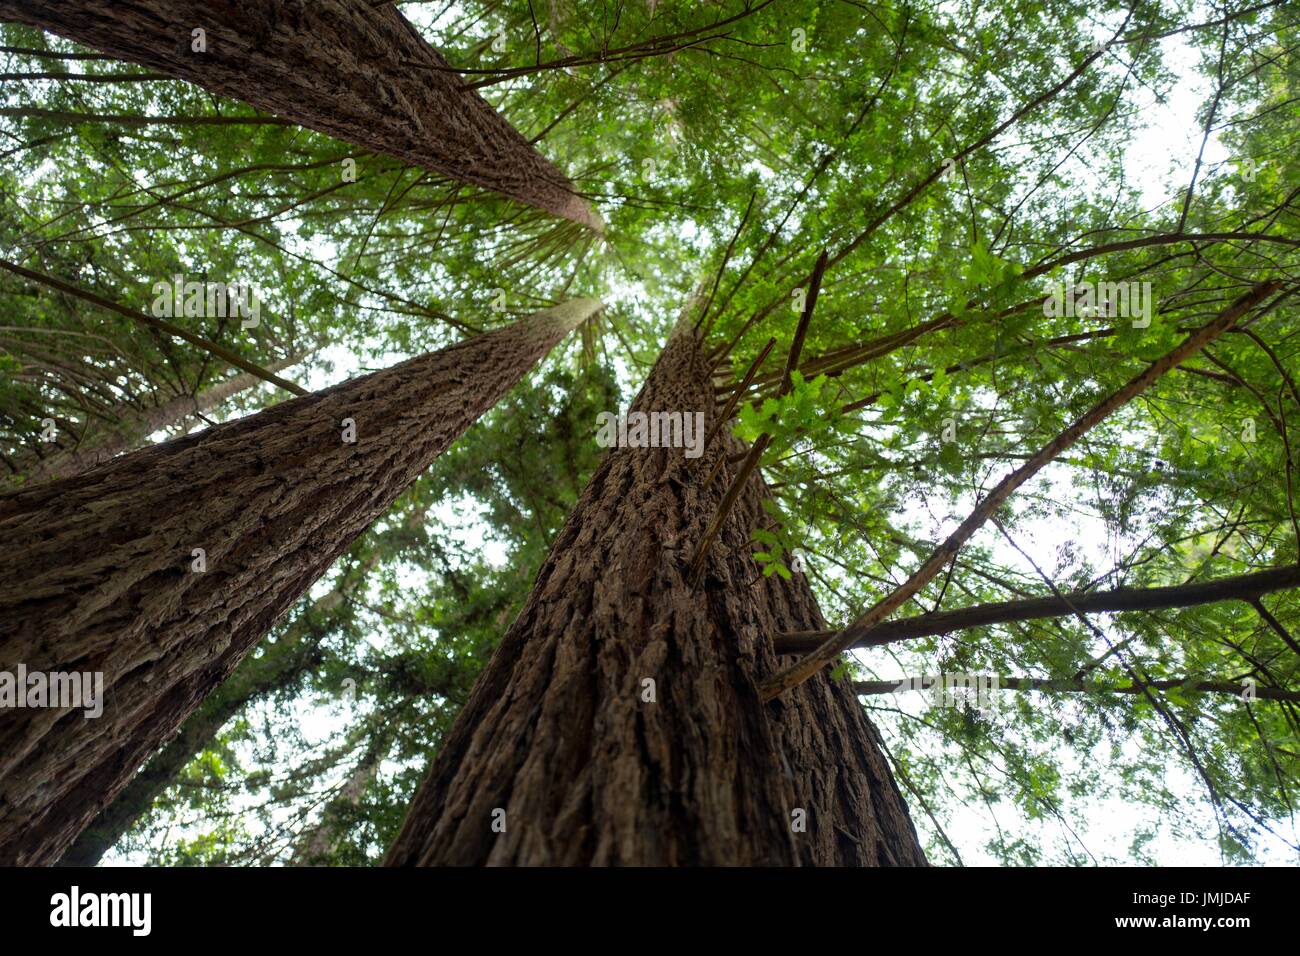 View up the trunks of mature coast redwood trees in Redwoods Regional Park, Oakland, California, May 26, 2017. Stock Photo